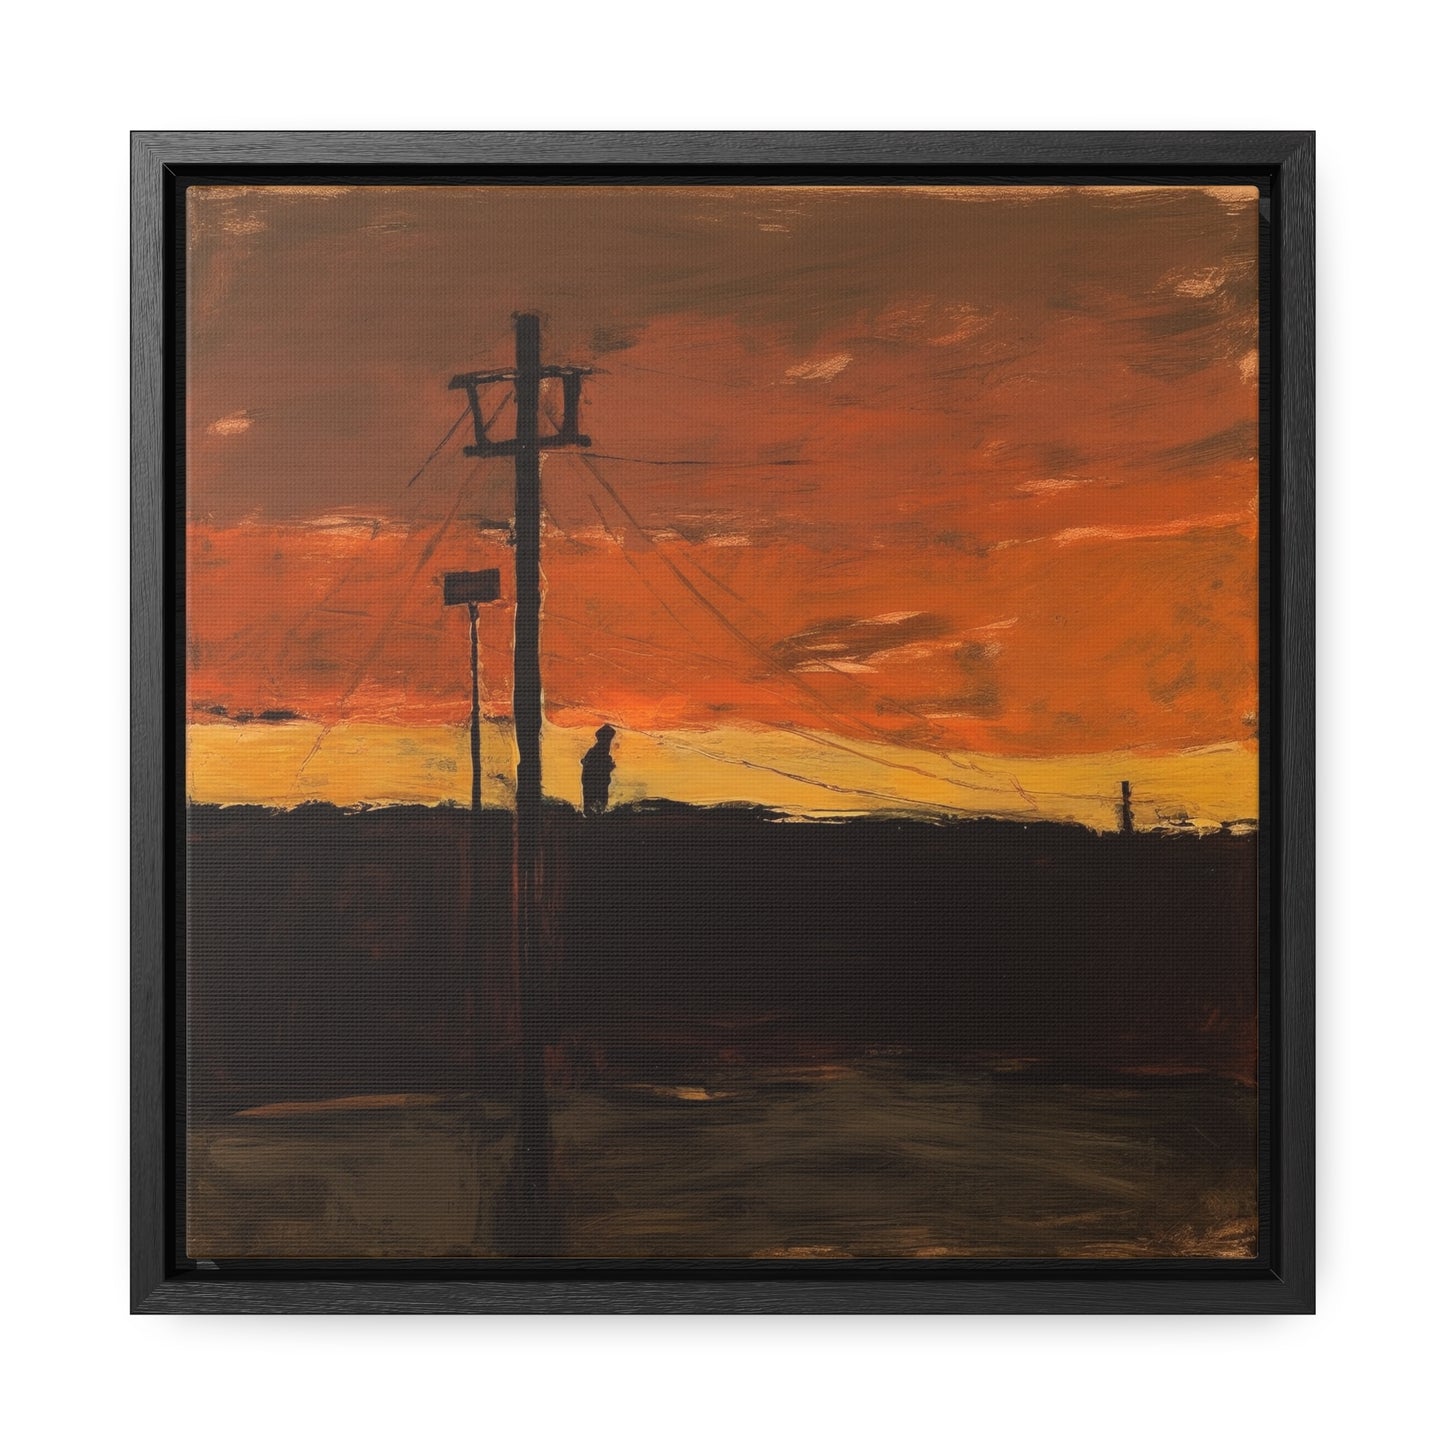 Land of the Sun 79, Valentinii, Gallery Canvas Wraps, Square Frame